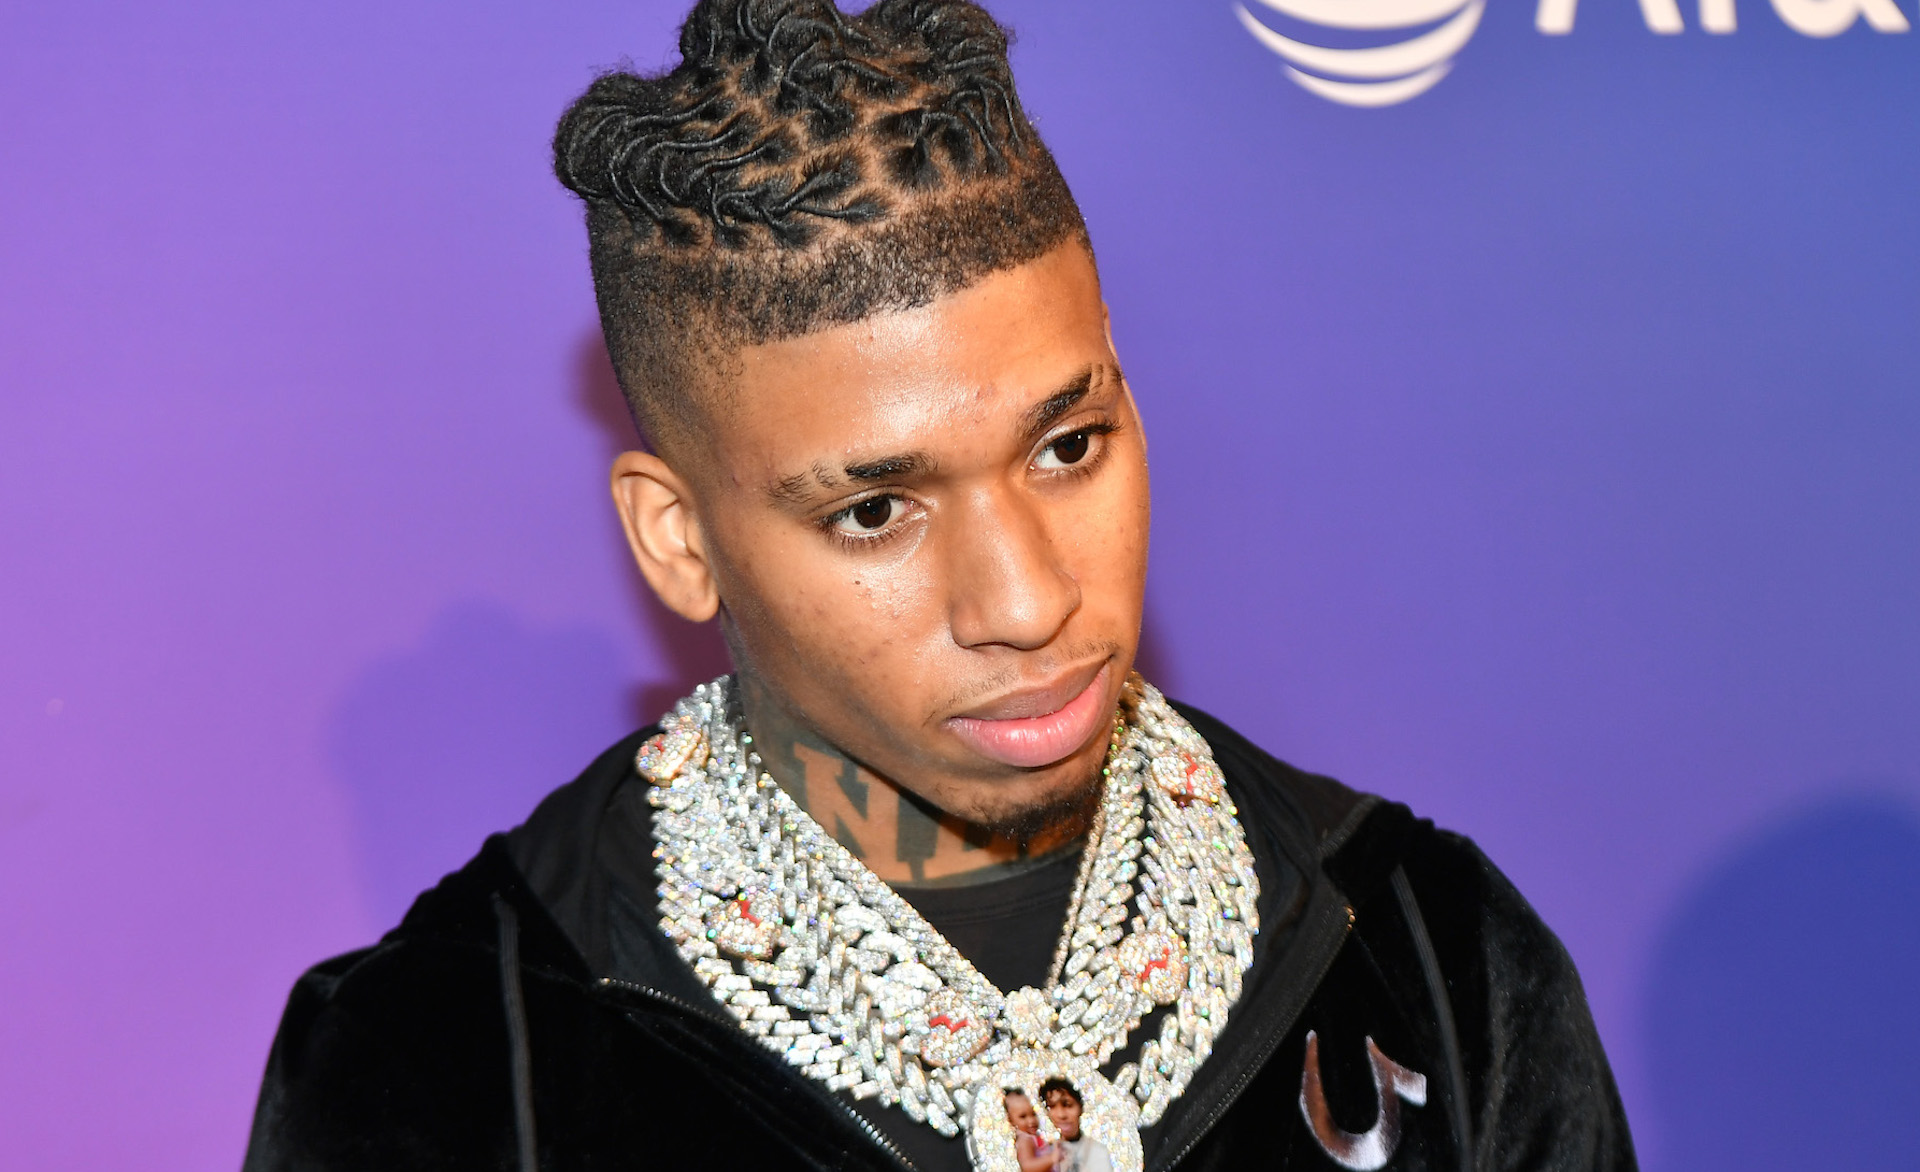 NLE Choppa Implies Hed Have a Threesome With Saweetie and His Girlfriend If “Icy Girl” Rapper Approached Him Complex image